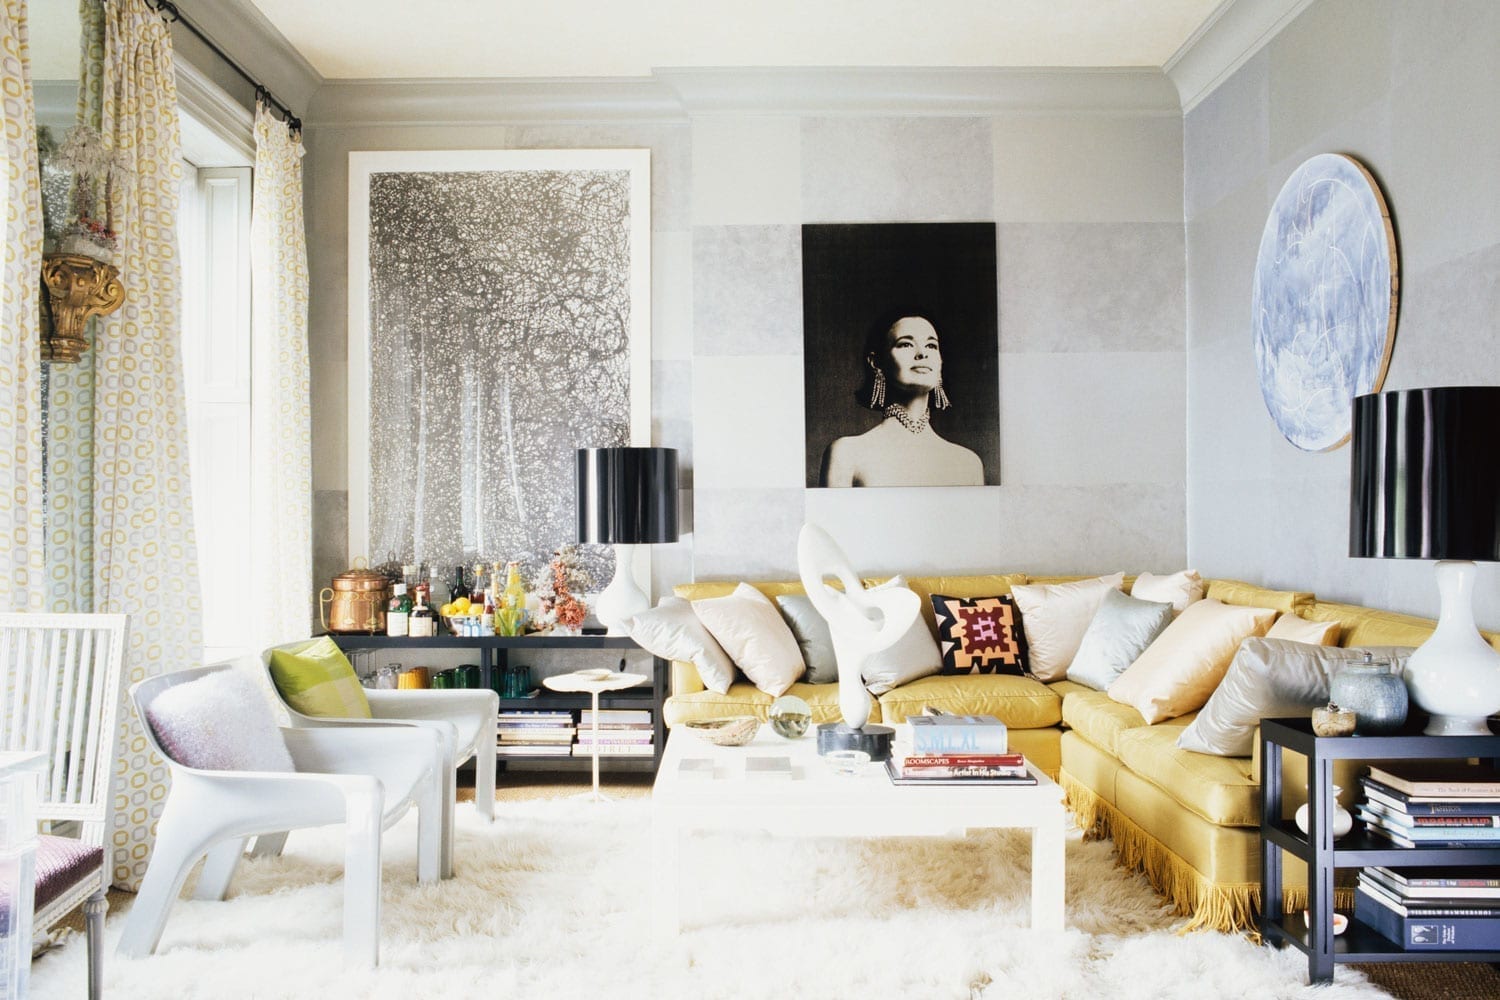 Contemporary living room with paintings, prints, and photos.